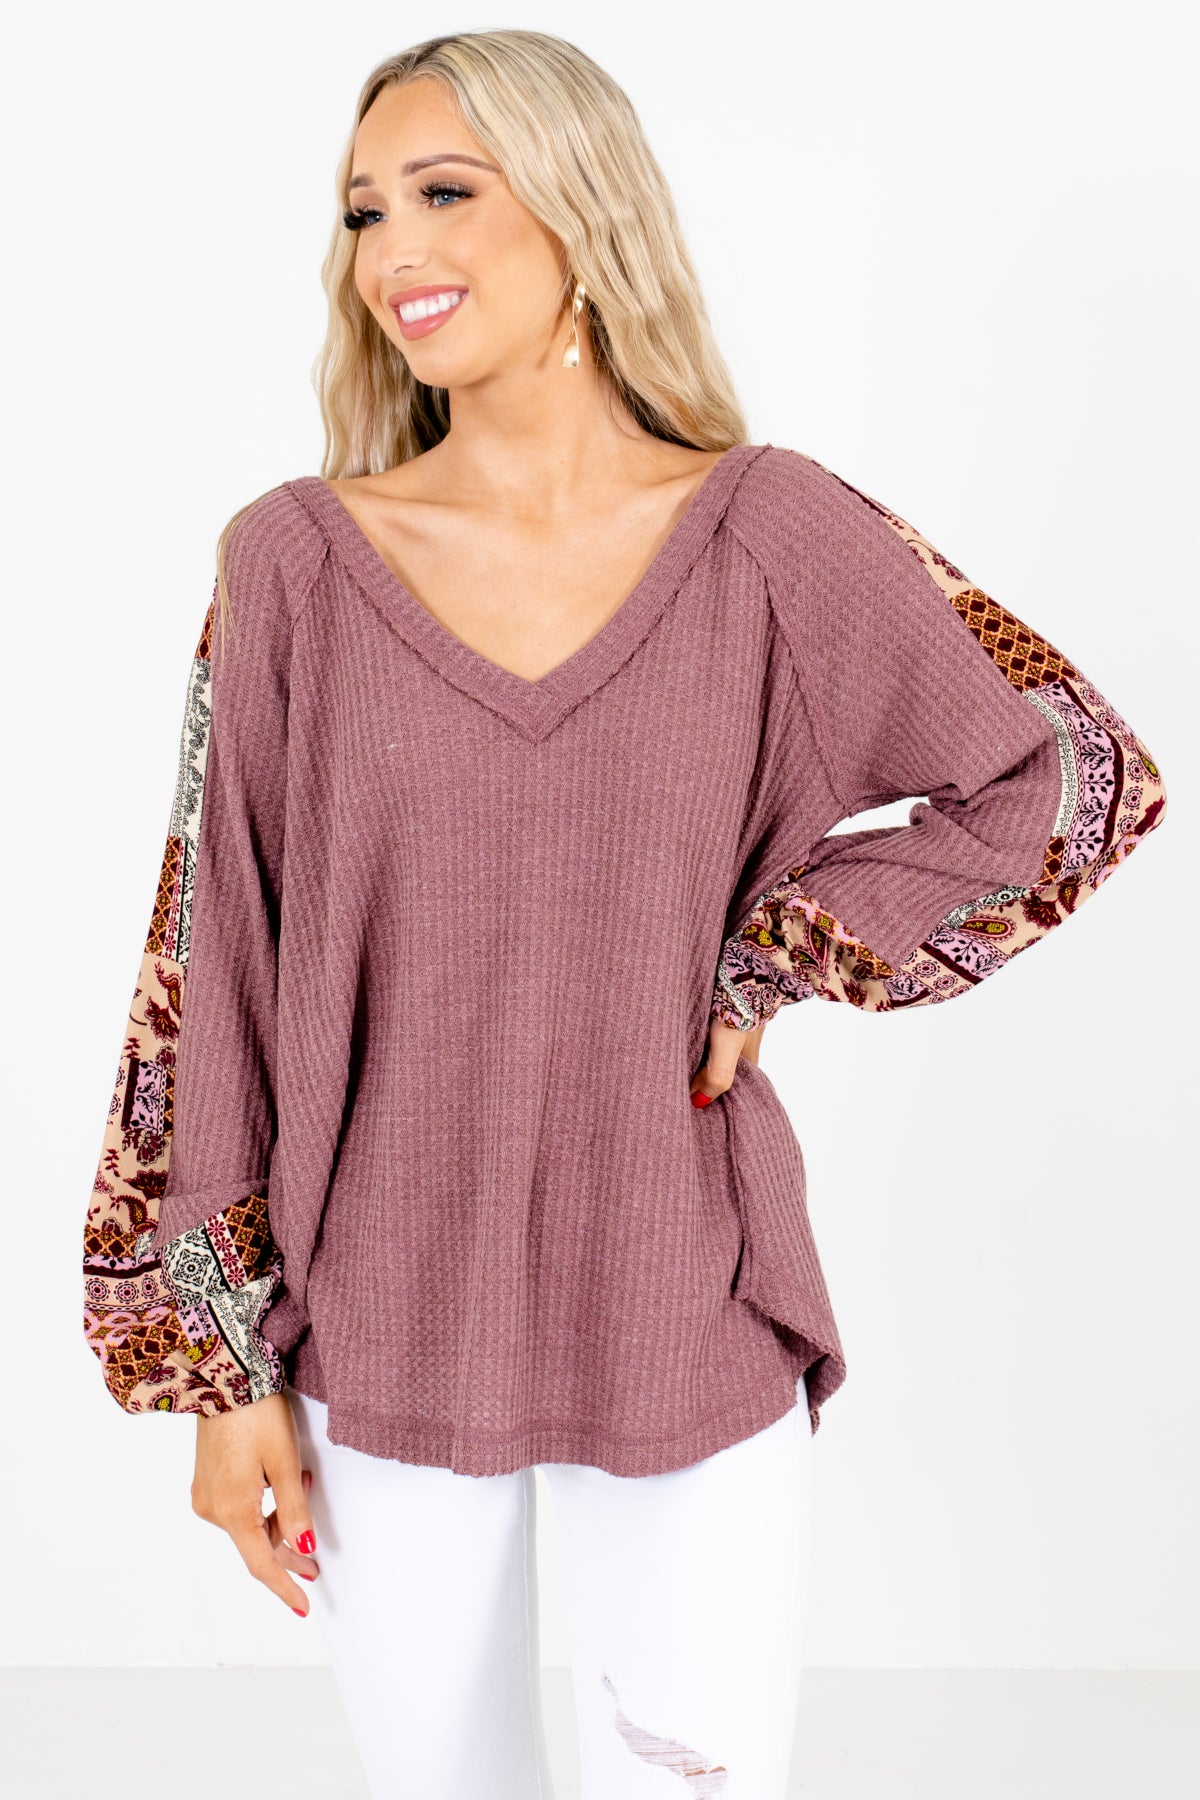 Purple Bishop Sleeve Boutique Blouses for Women